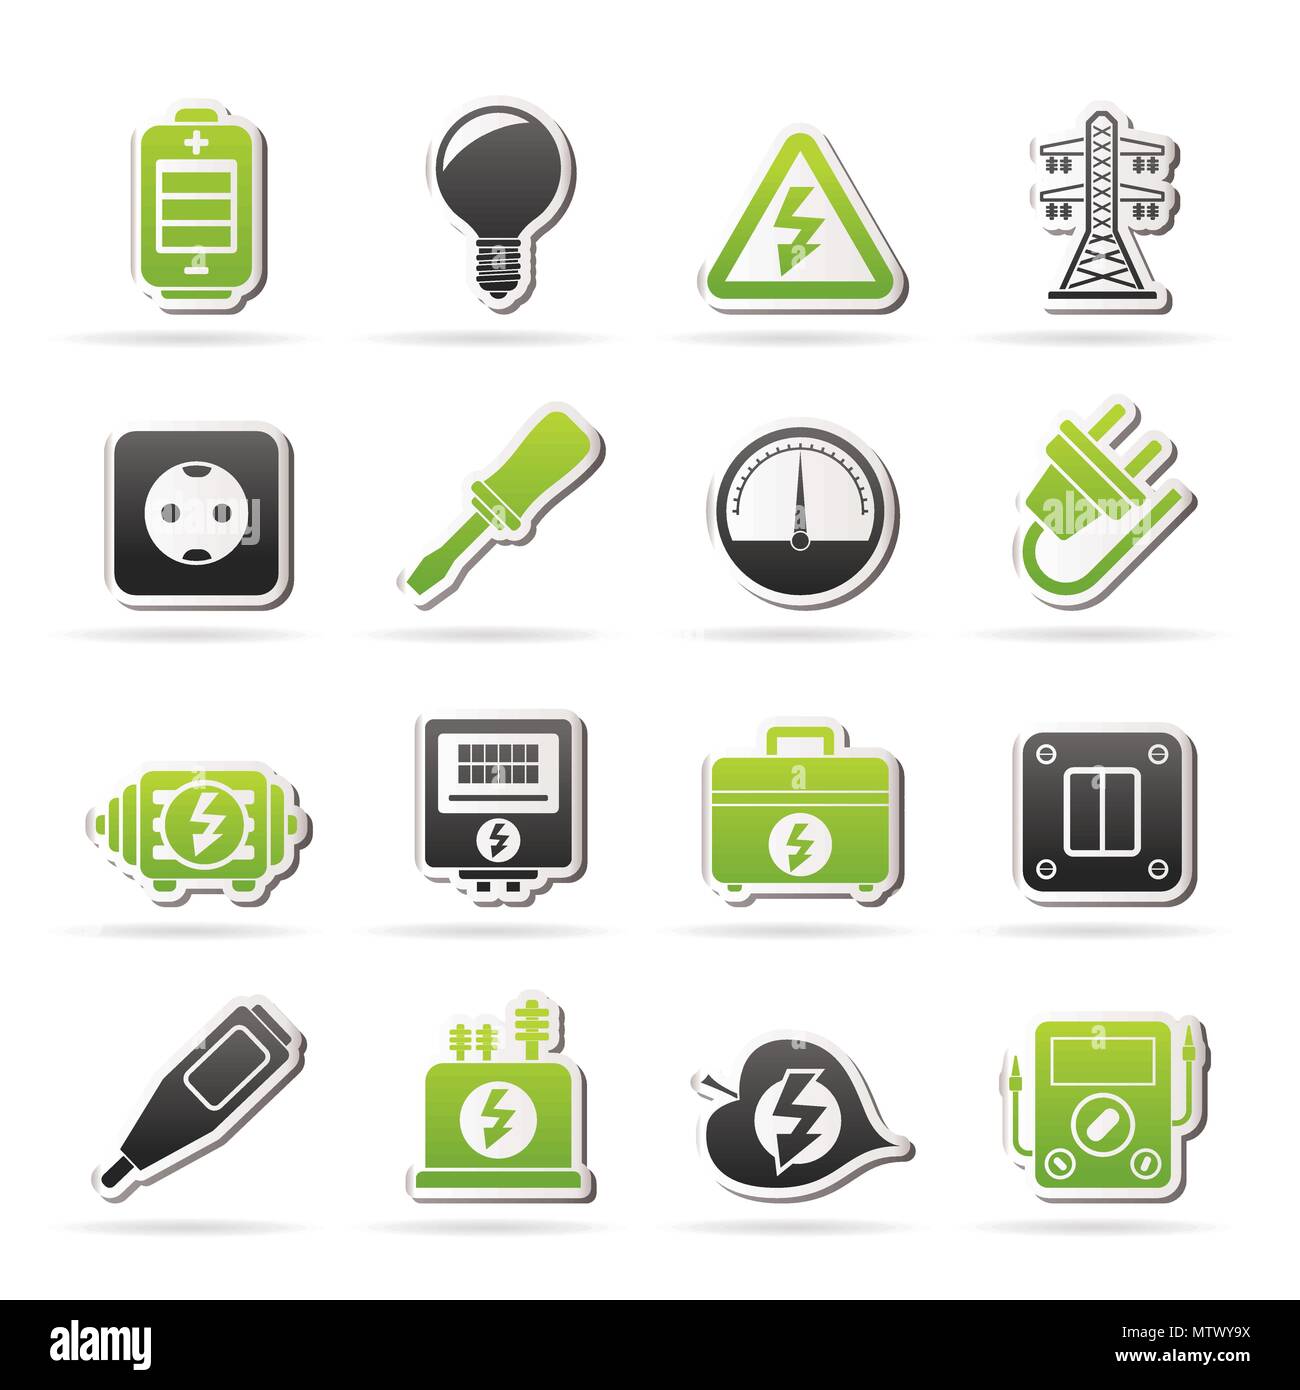 Electricity, power and energy icons - vector icon set Stock Vector